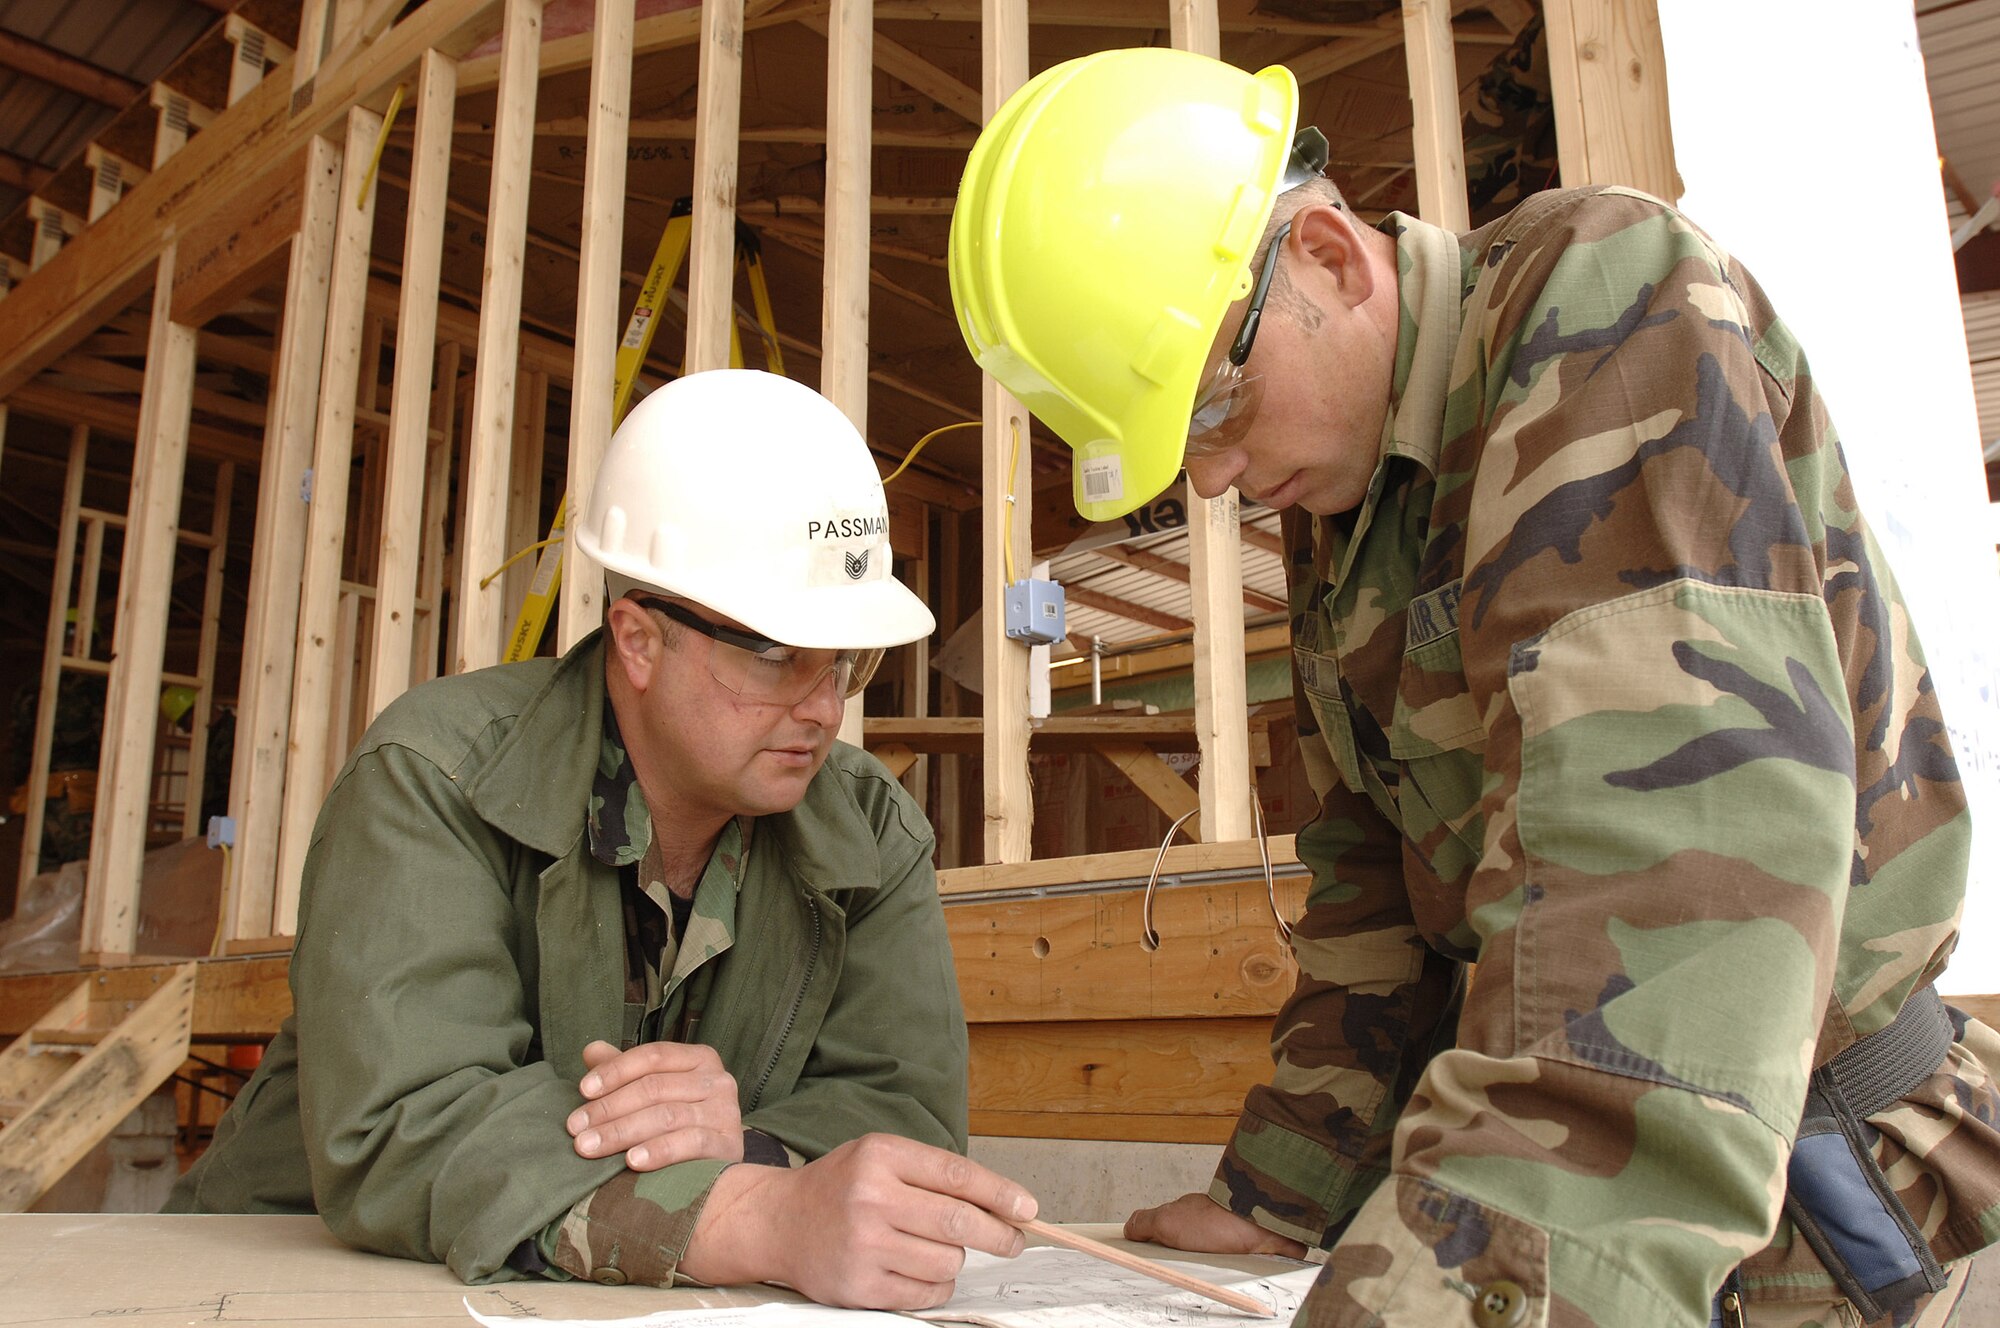 Tech Sgt. James Passman reviews electrical plans with Air Force Academy Cadet 2nd Class Forrest McLain during construction of a house being built by cadets.  The cadets are participating in the Field Engineering and Readiness Laboratory course at the Academy that exposes them to several aspects of civil engineering, including heavy equipment operation, steel bridge construction, designing and pouring concrete beams and paving portions of a road.  Sergeant Passman is with the 5th Civil Engineer Squadron at Minot Air Force Base, N. D. (U.S. Air Force photo/Mike Kaplan)